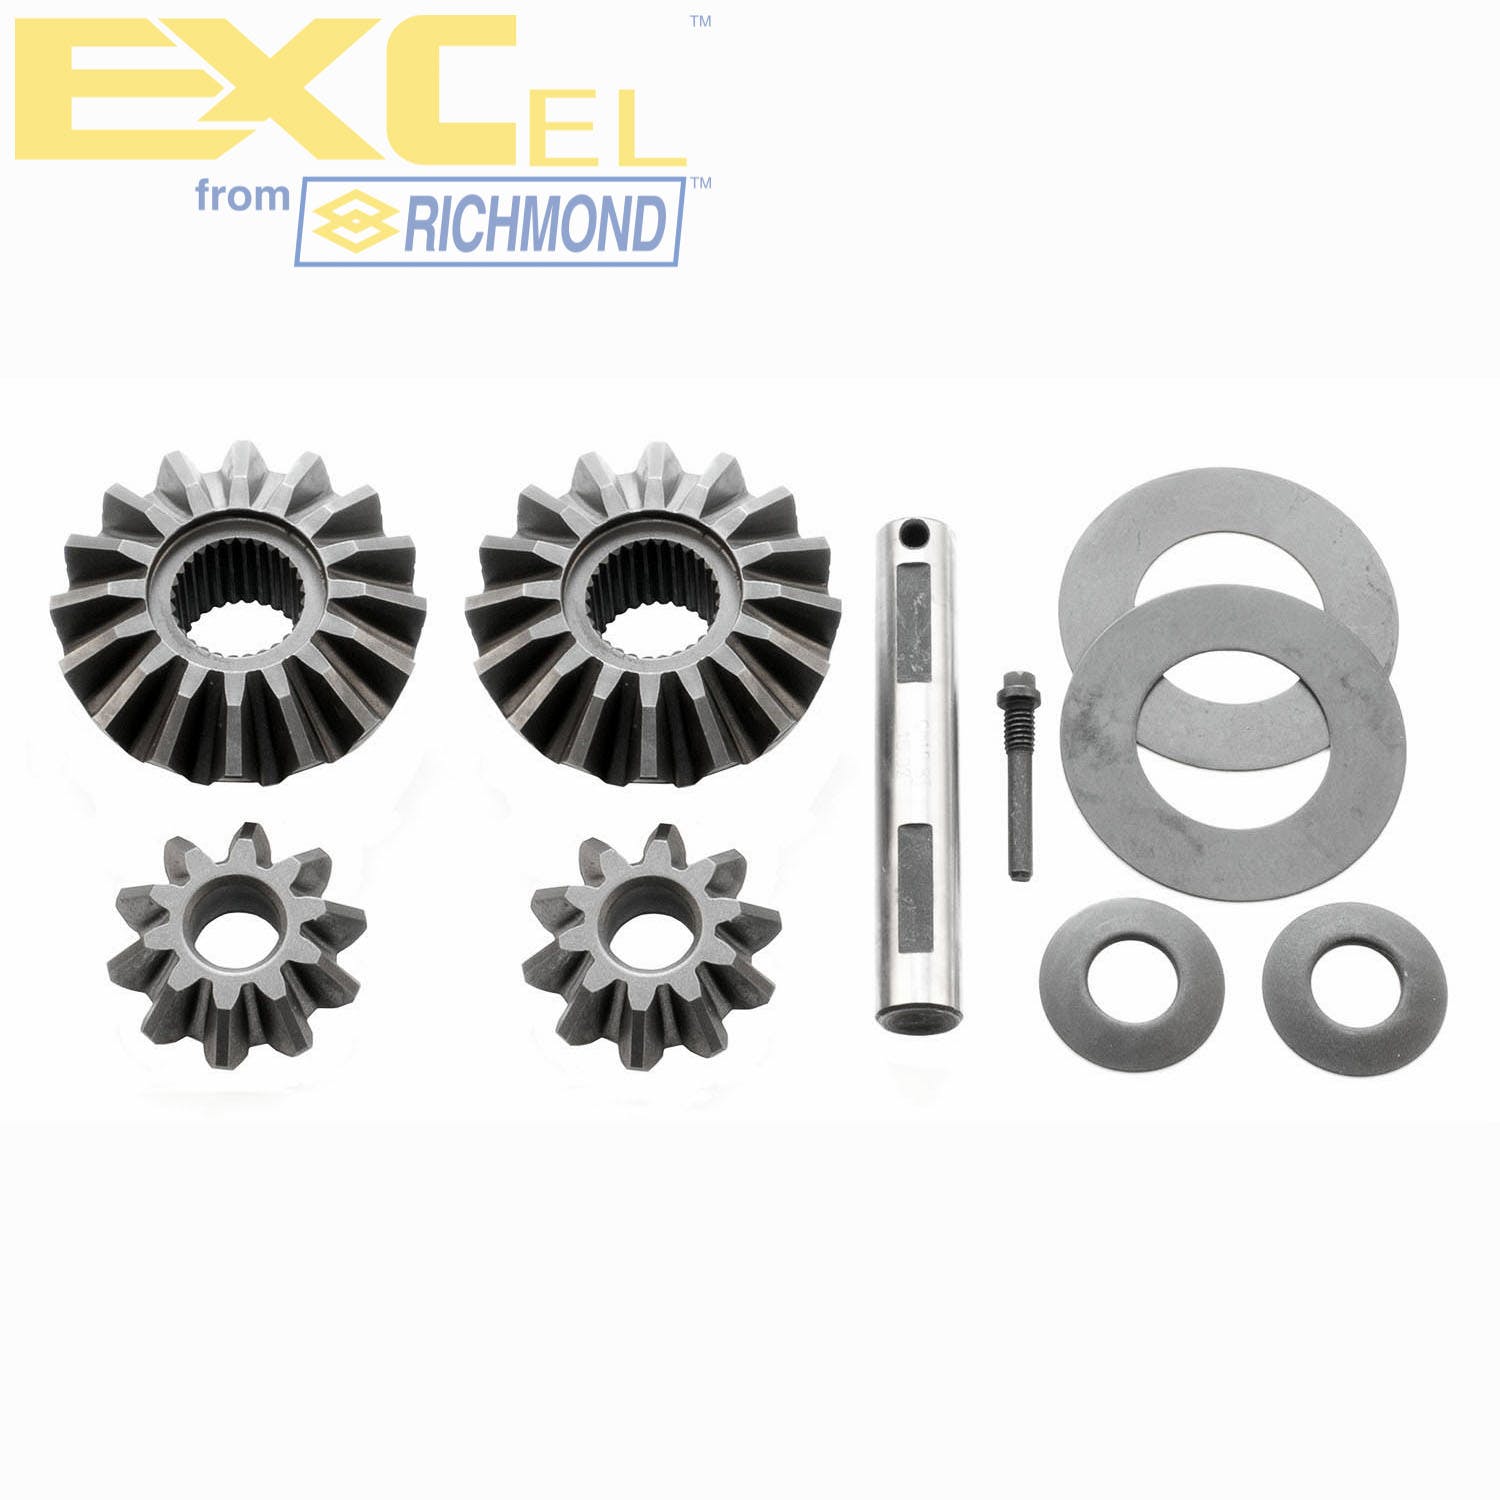 Excel XL-4048 Differential Carrier Gear Kit